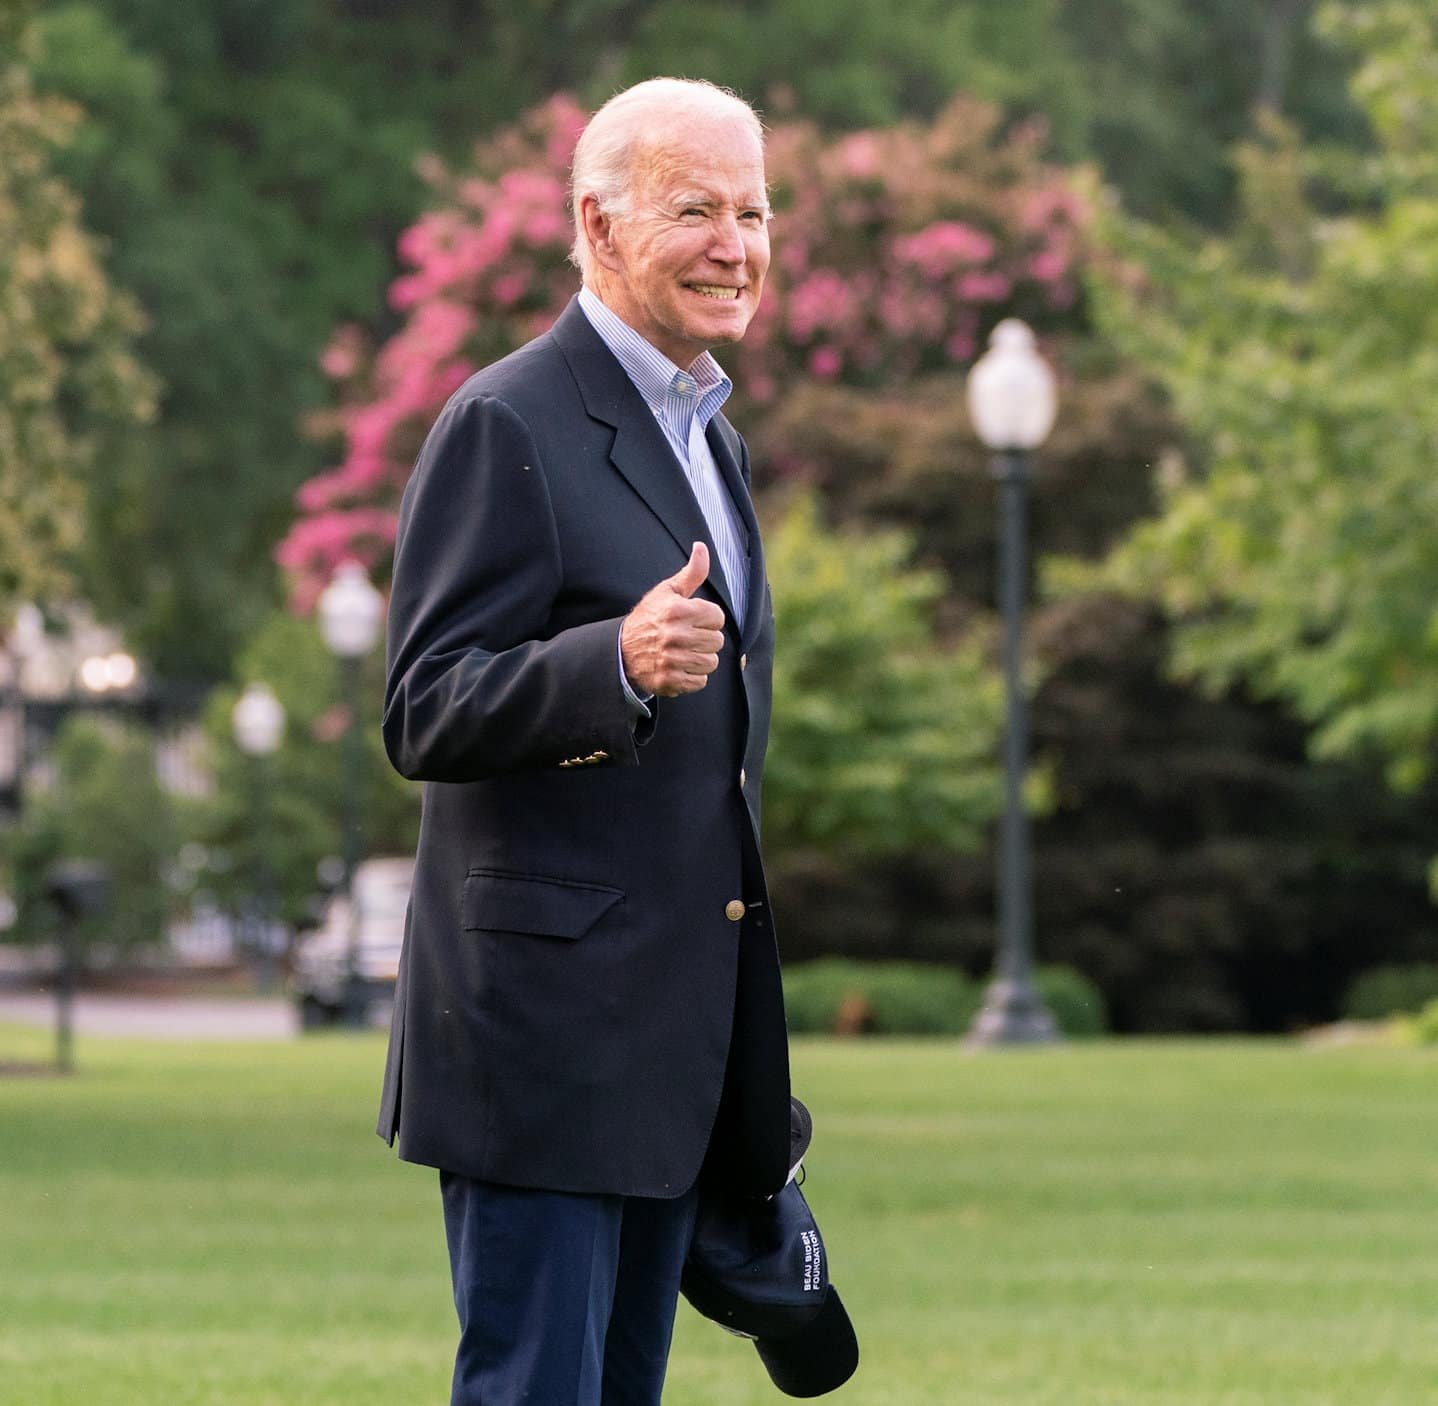 Senate Democrats Pass Budget Package, a Victory for Biden